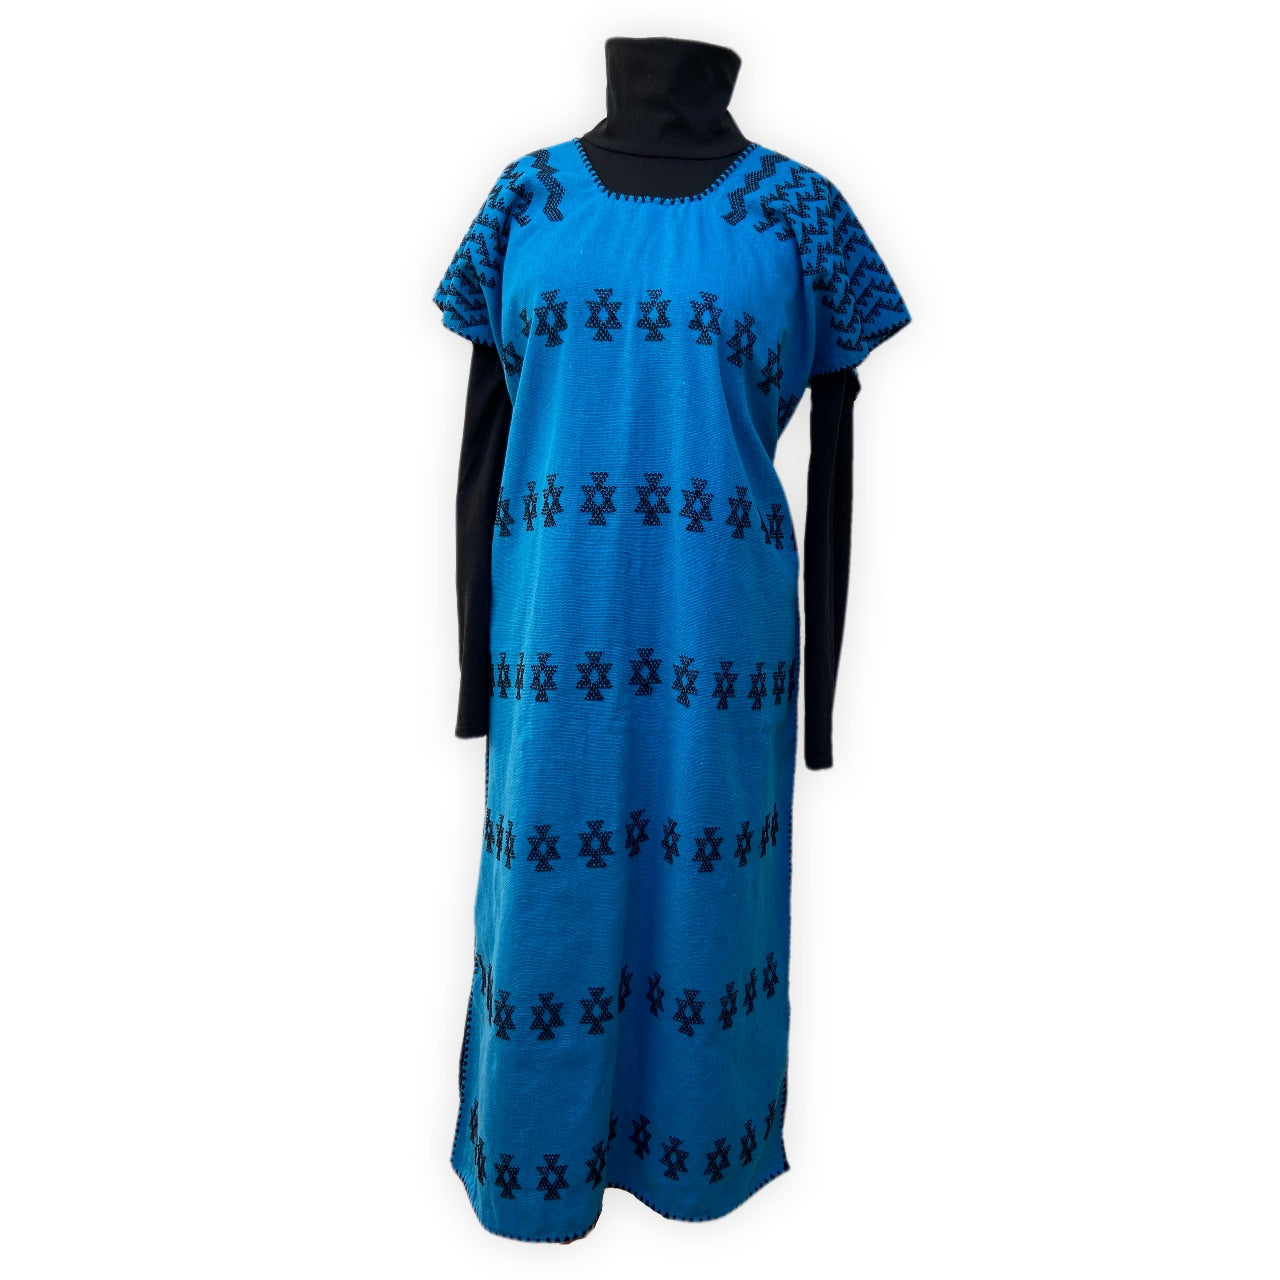 Hand woven blue huipil dress with black brocades